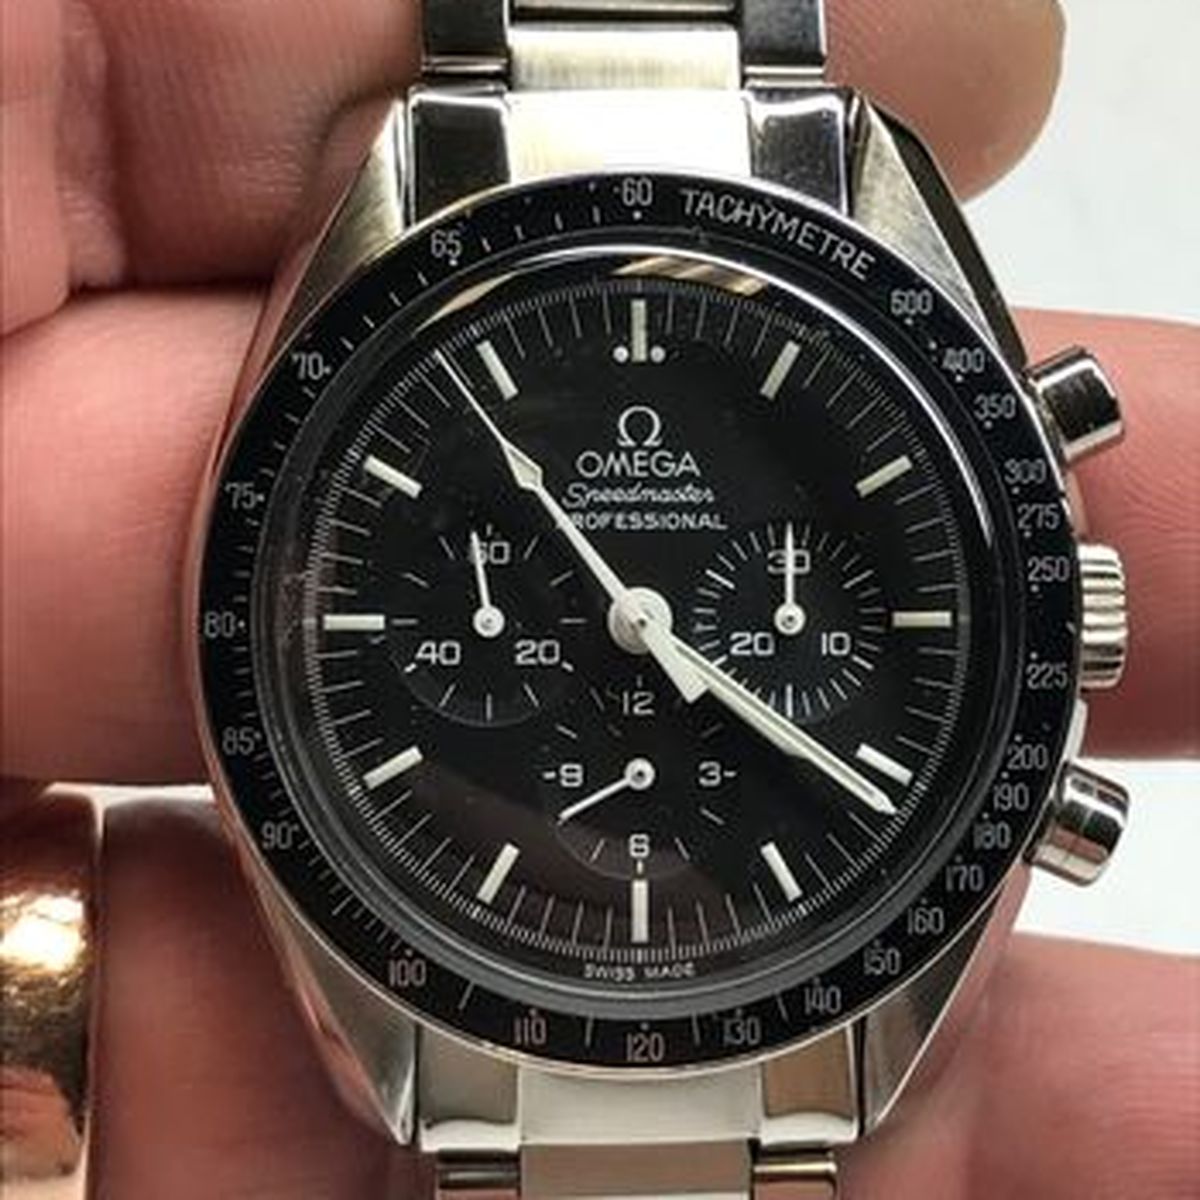 Is it Time to Service Your Omega Watch?